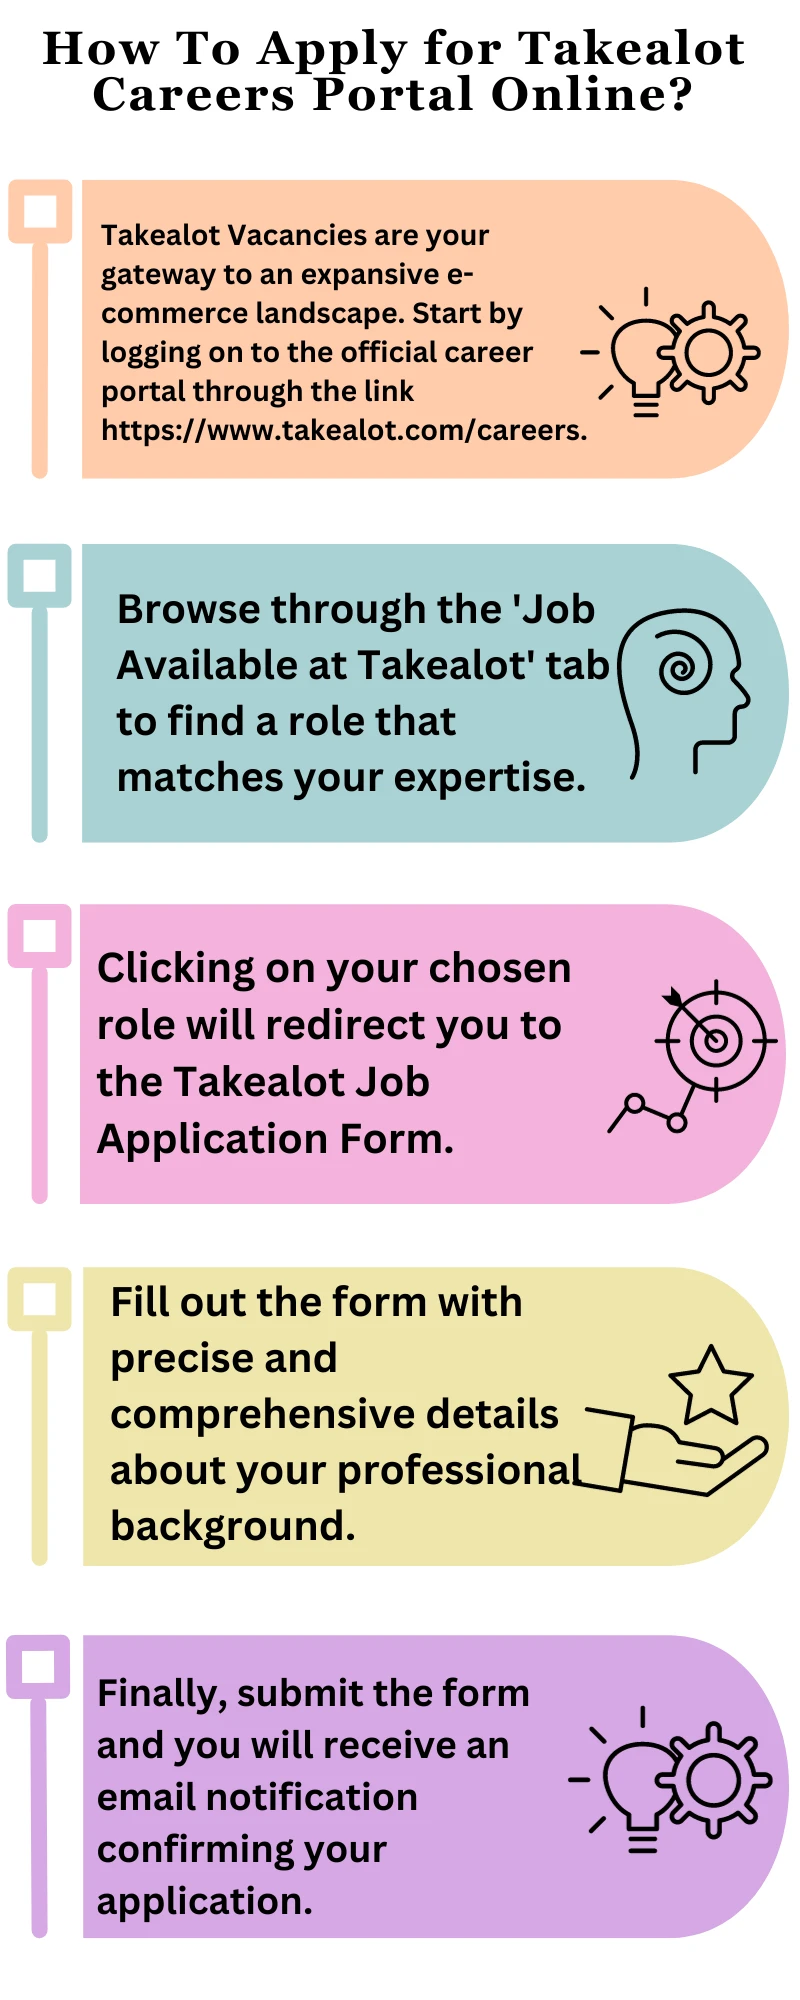 How To Apply for Takealot Careers Portal Online?